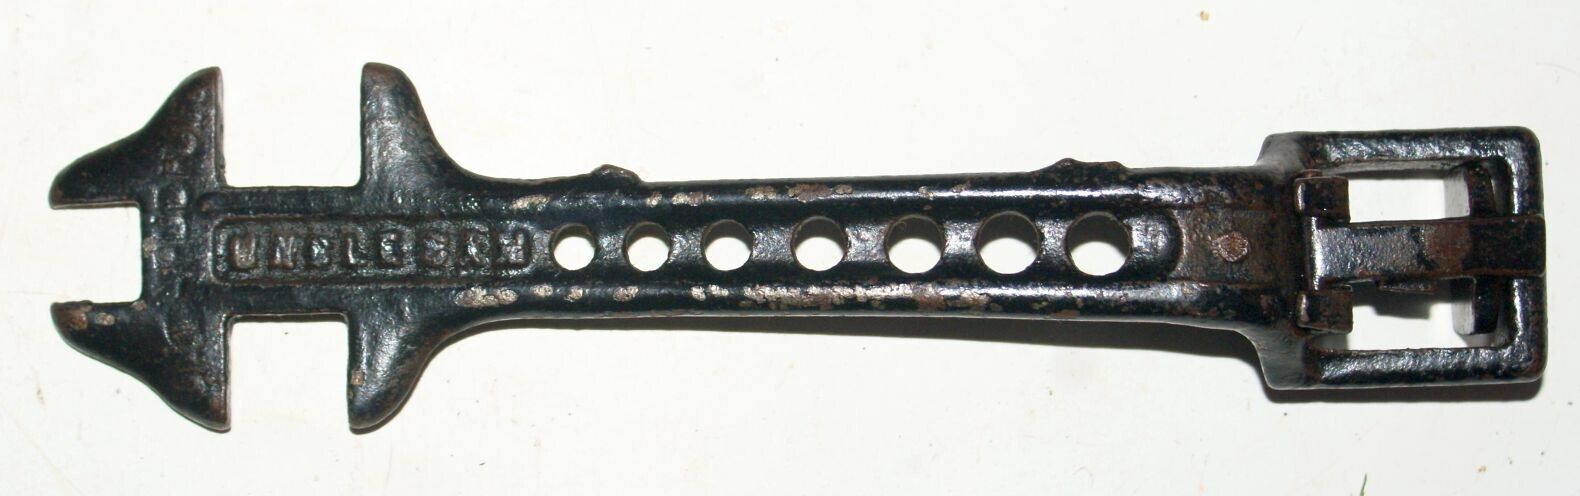 Old Antique UNCLE SAM Richards Wilcox buggy Carriage Wagon Wrench Tool 0171